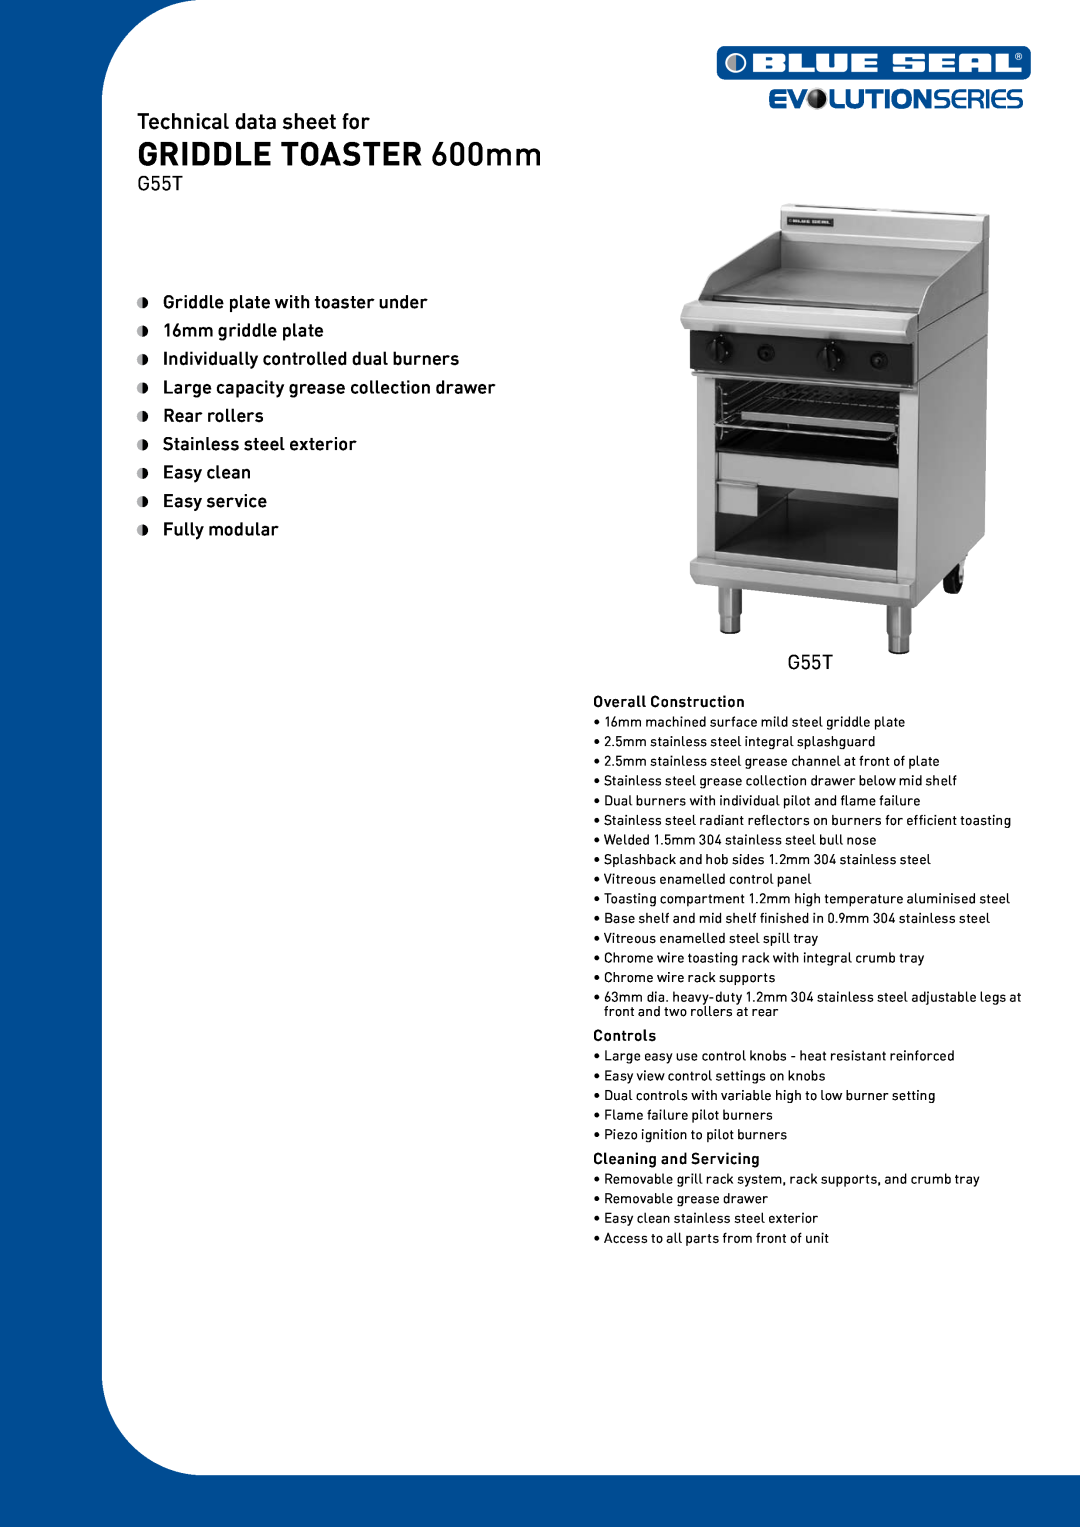 Moffat G55T manual GRIDDLE TOASTER 600mm, Technical data sheet for, Overall Construction, Controls, Cleaning and Servicing 